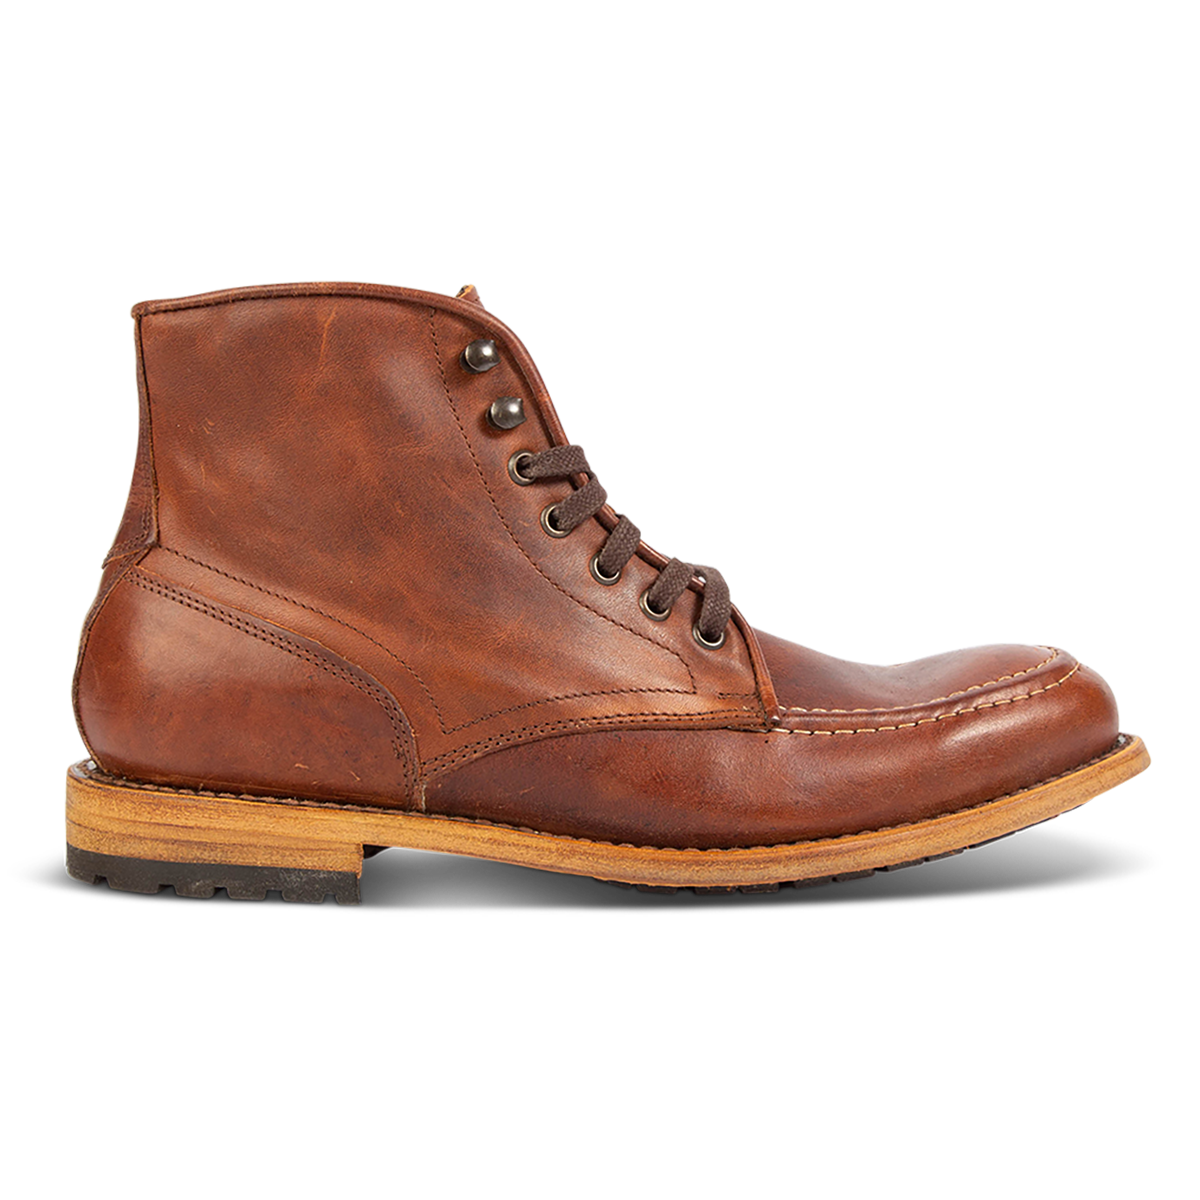 FREEBIRD men's Benning cognac front lace closure boot with tread sole